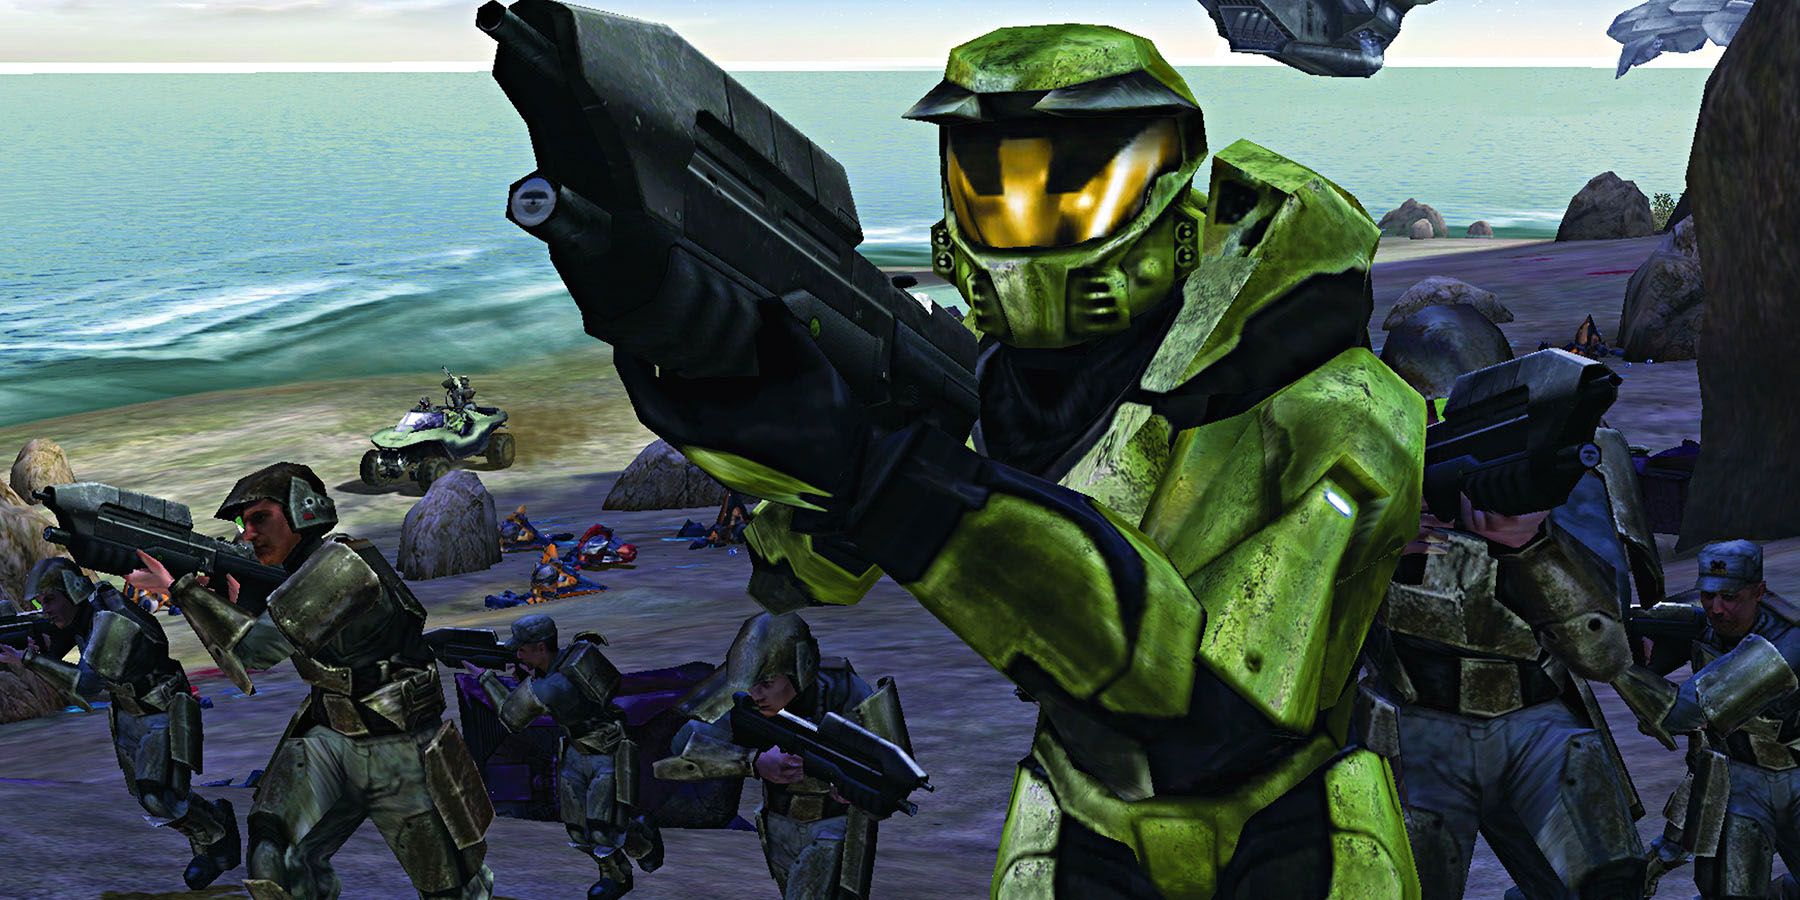 A screenshot from the original Halo, featuring Master Chief leading a sqaud of soliders into battle.